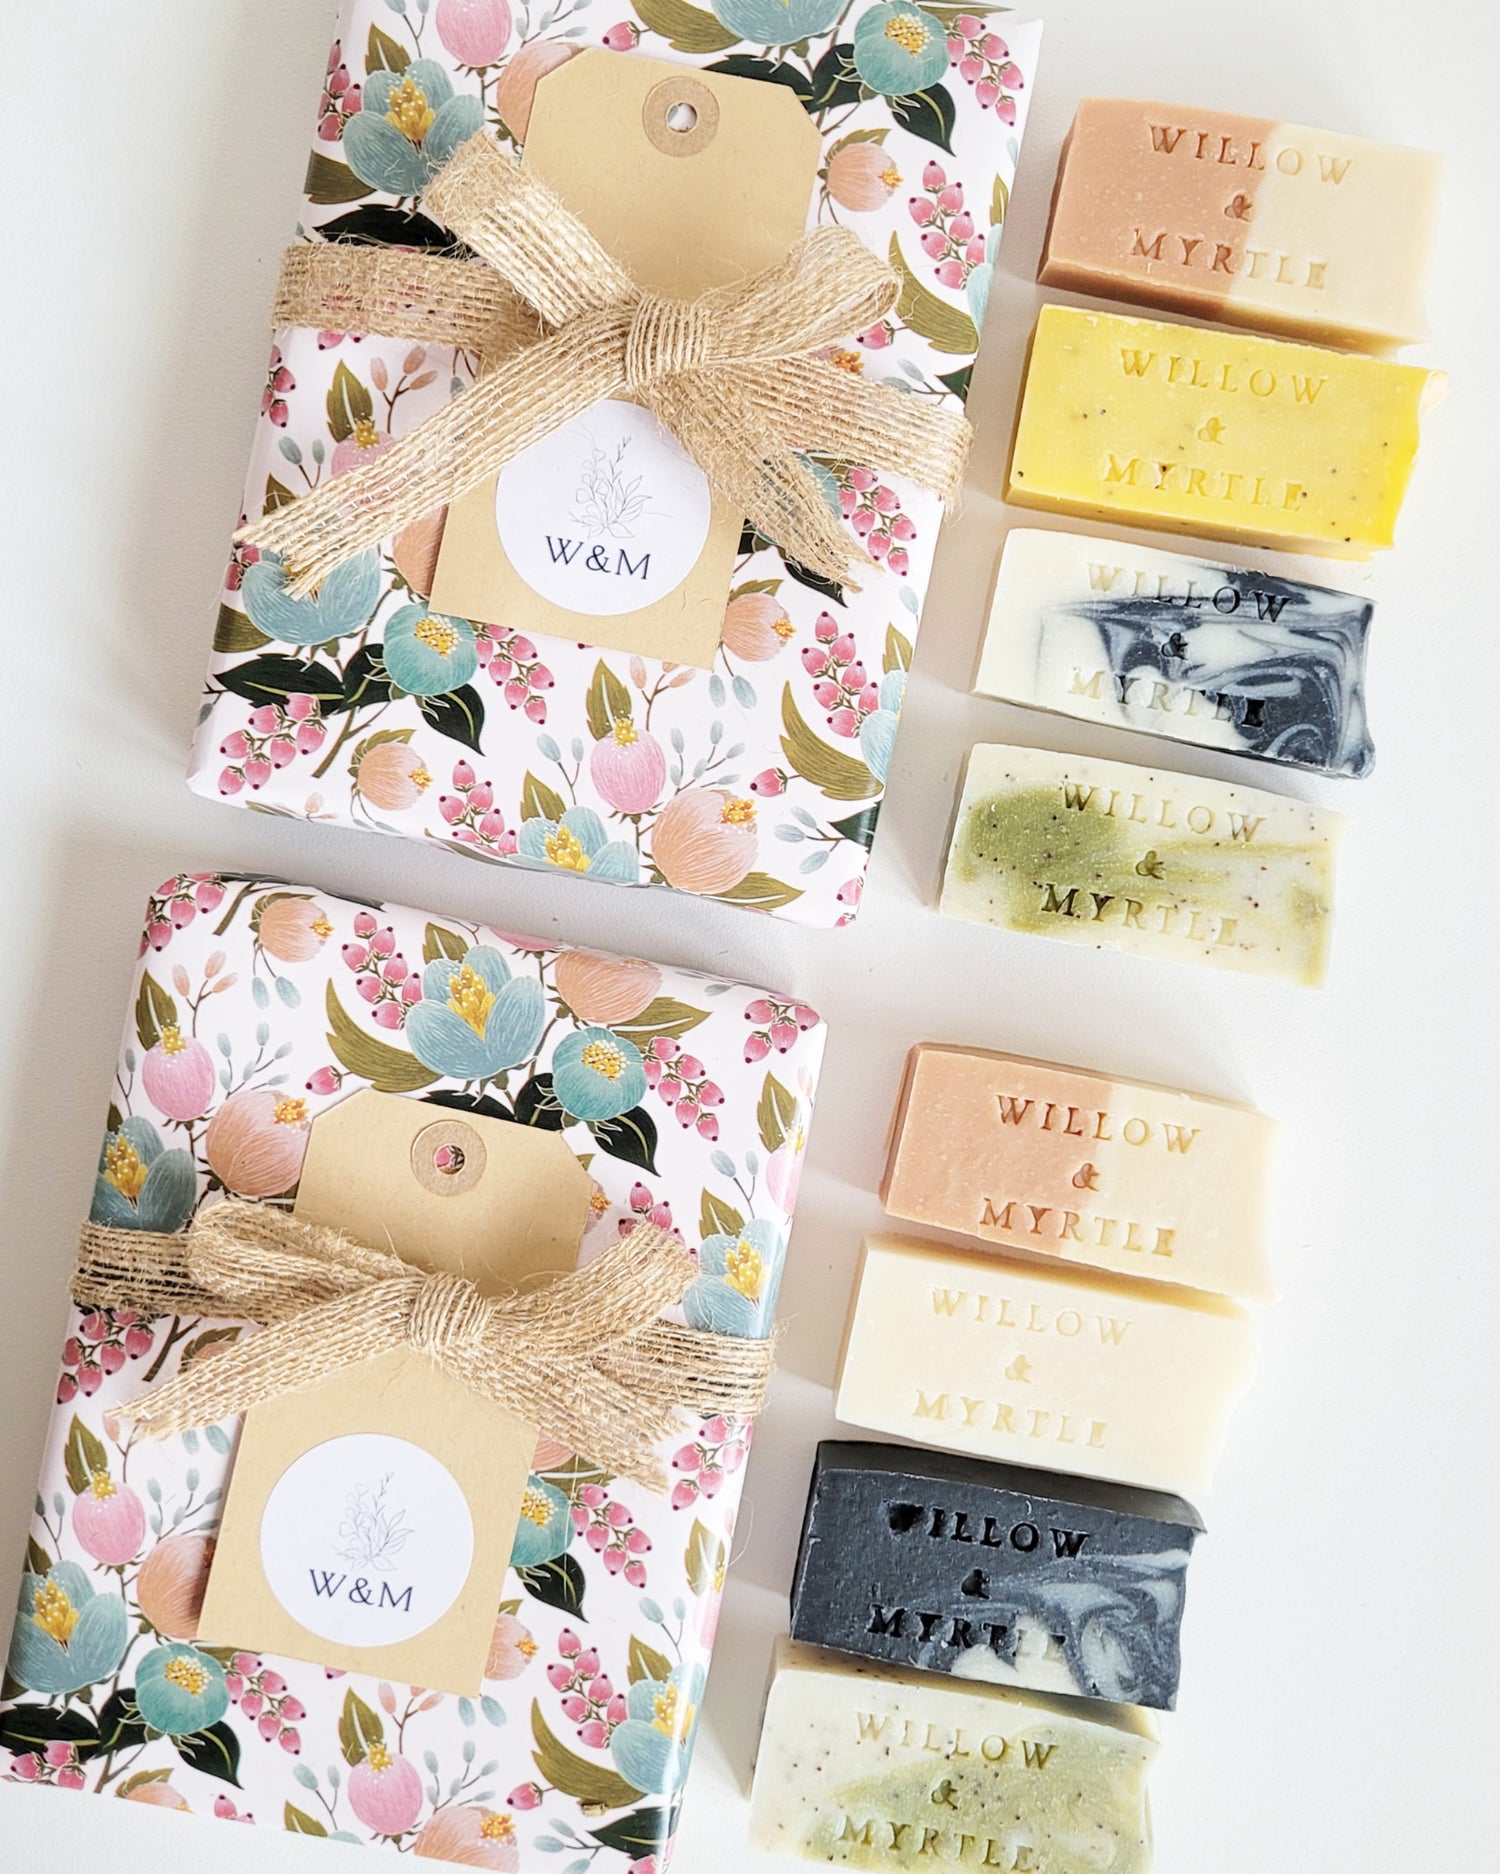 soap packaging ideas. soap gift box with mini soap bars, perfect for travel or presents or simply to try a few soap samples